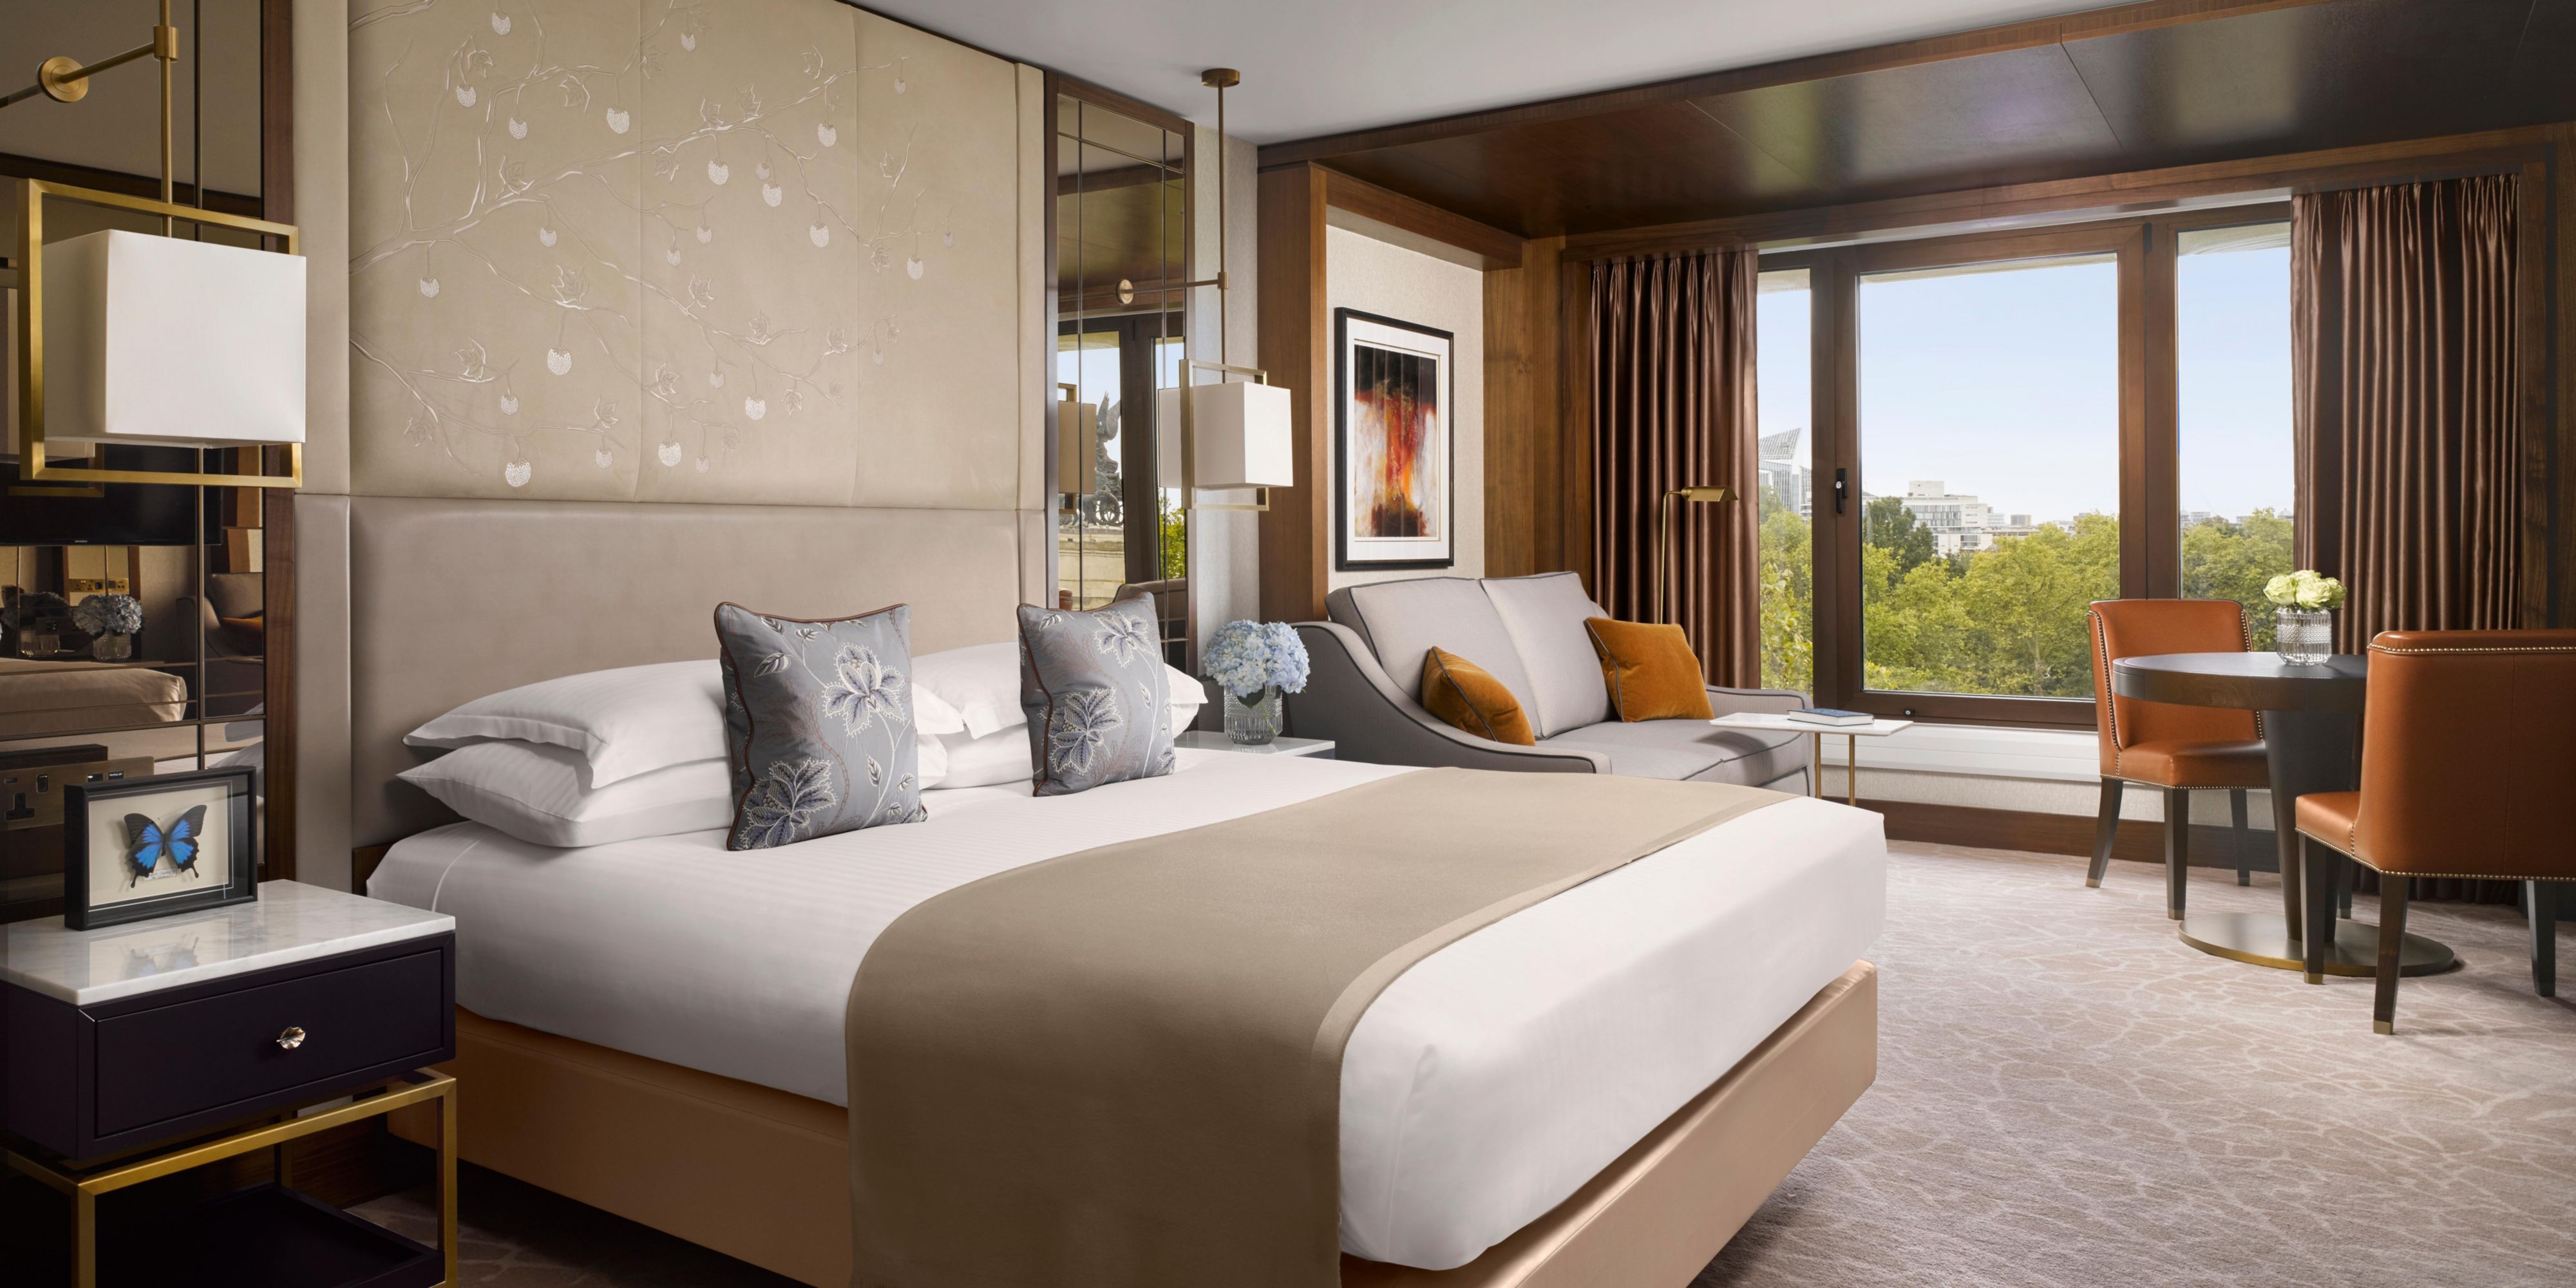 The newly refurbished Mayfair Collection has been impeccably designed to offer guests the highest standard of luxury accommodation in London. Combining natural tones, sumptuous textures and modern amenities, the collection takes inspiration from its unparalleled location overlooking the Royal Parks in the heart of London. 